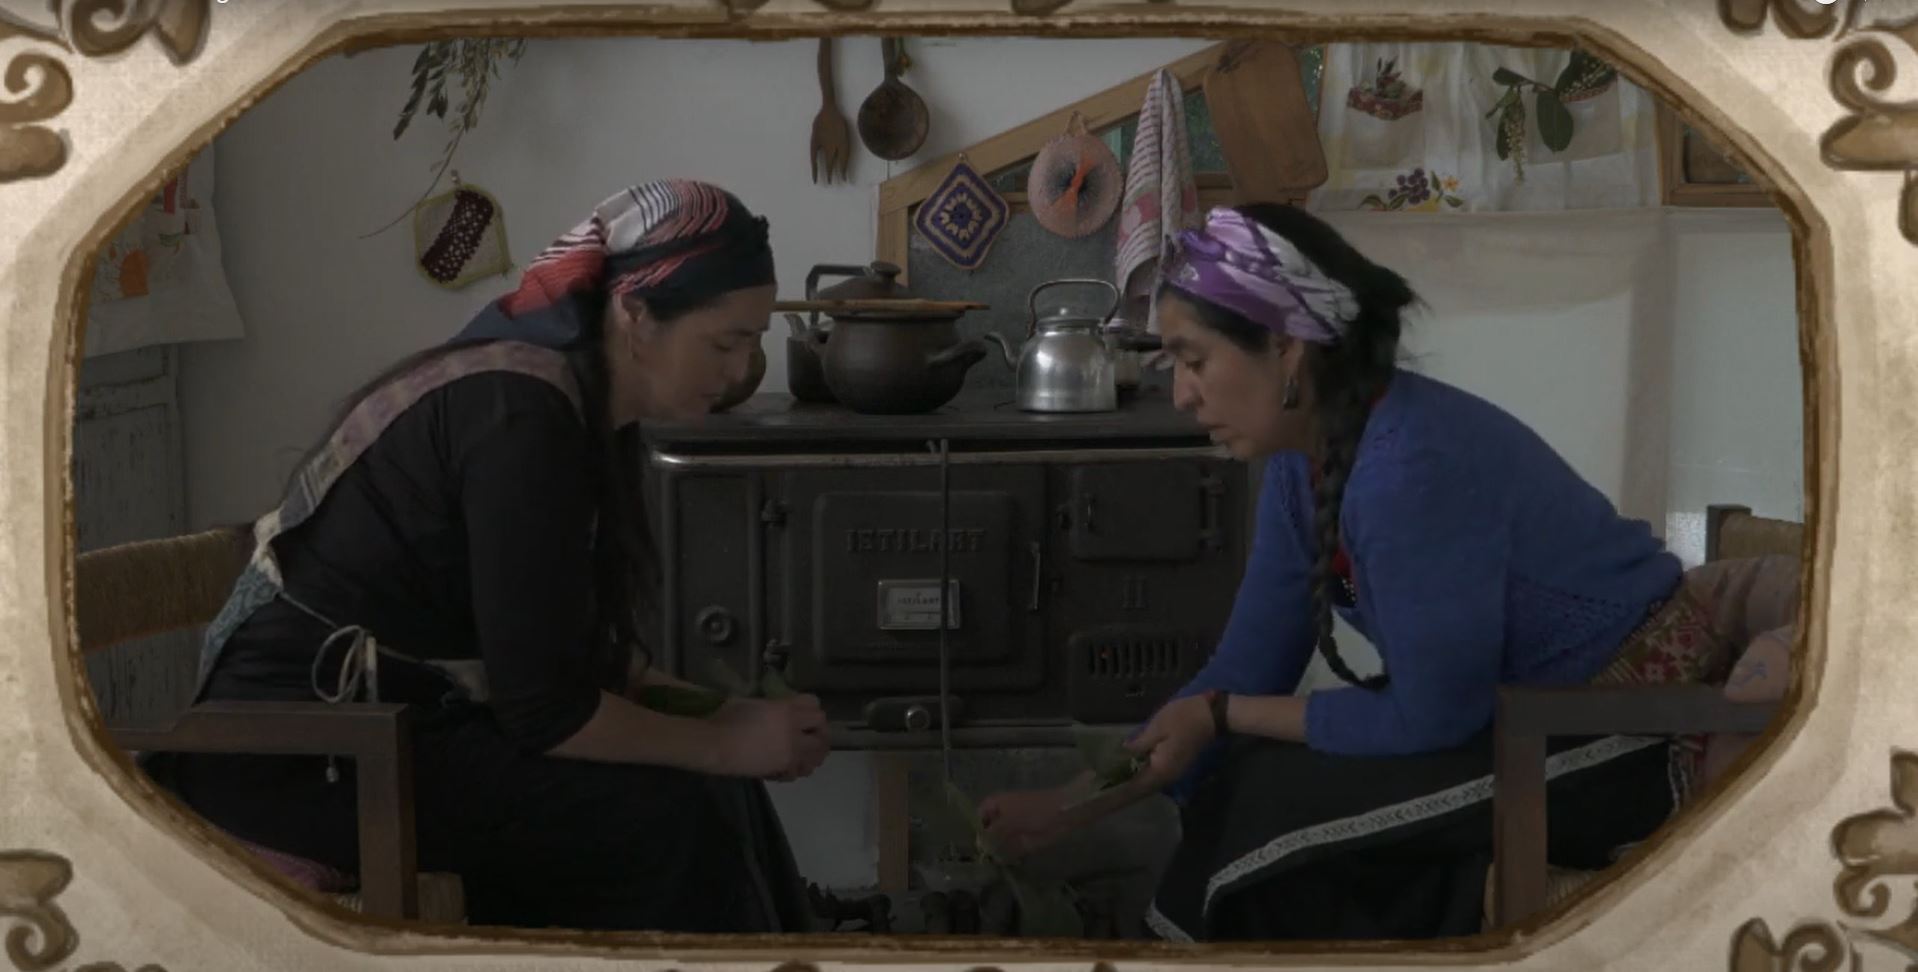 Video about two Mapuche women in the kitchen of a rural home, preparing an herbal remedy to cure a Mapuche longko (chief).